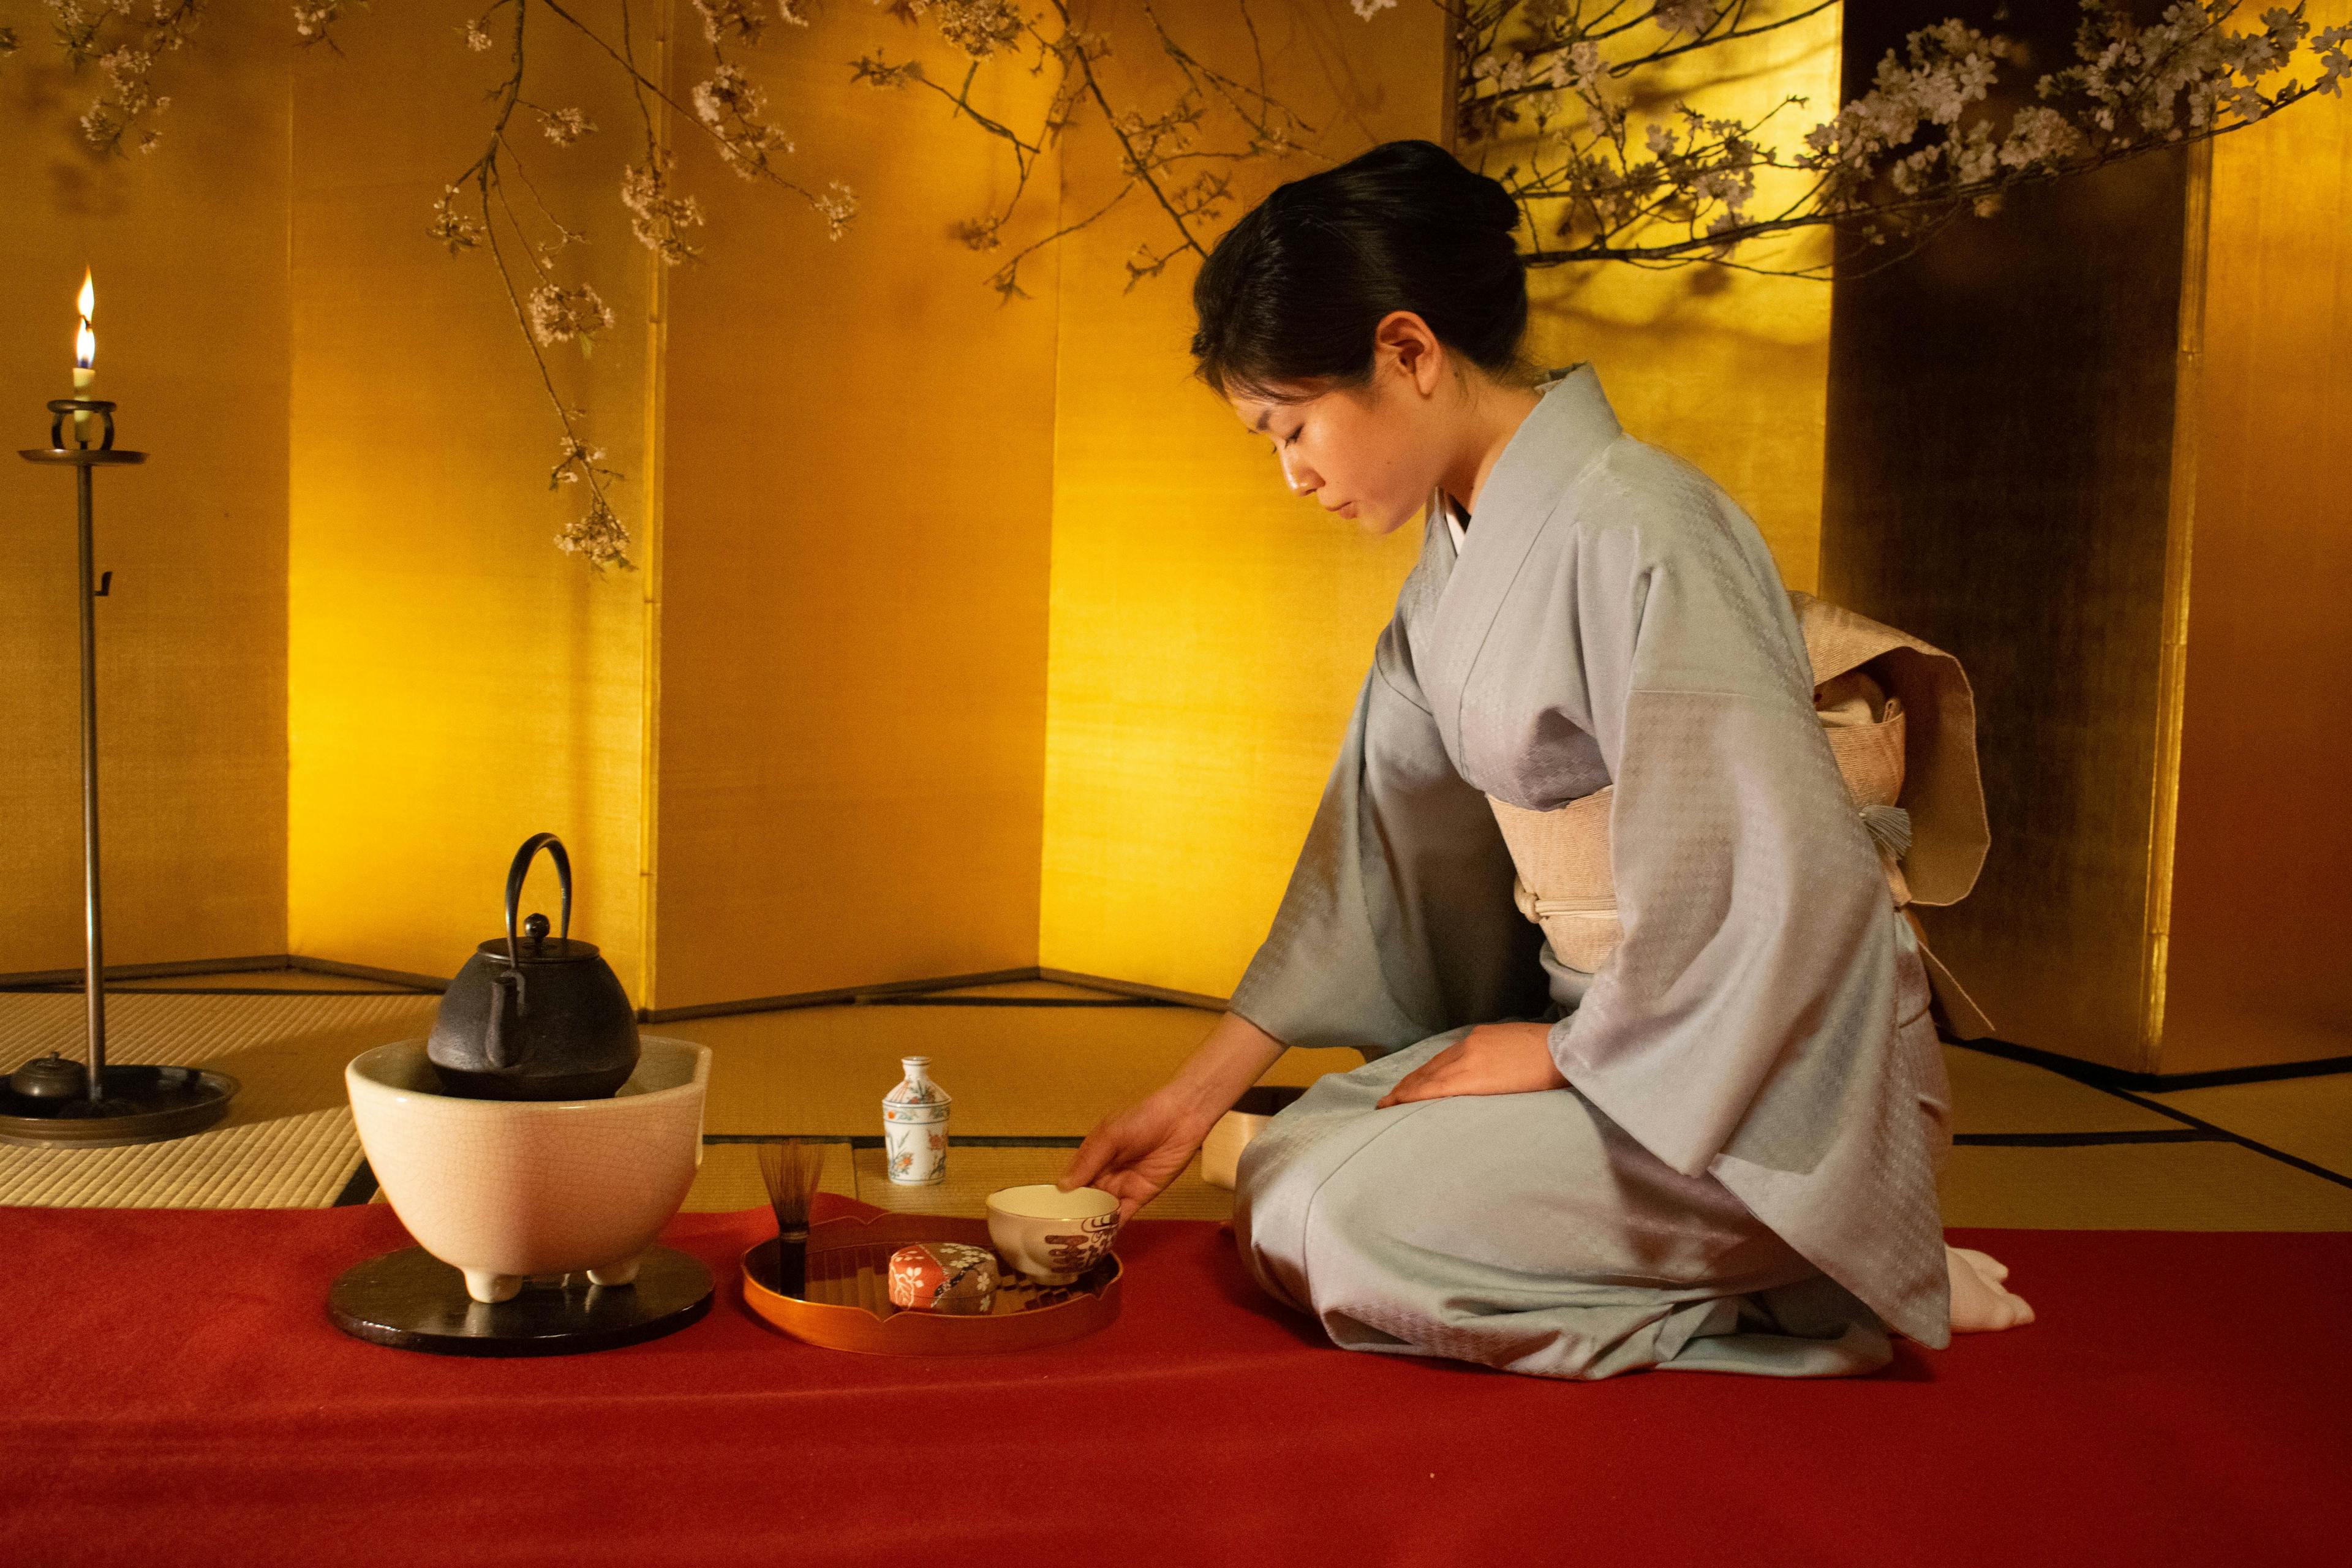 Woman performing a tea ceremony in Kyoto Japan.